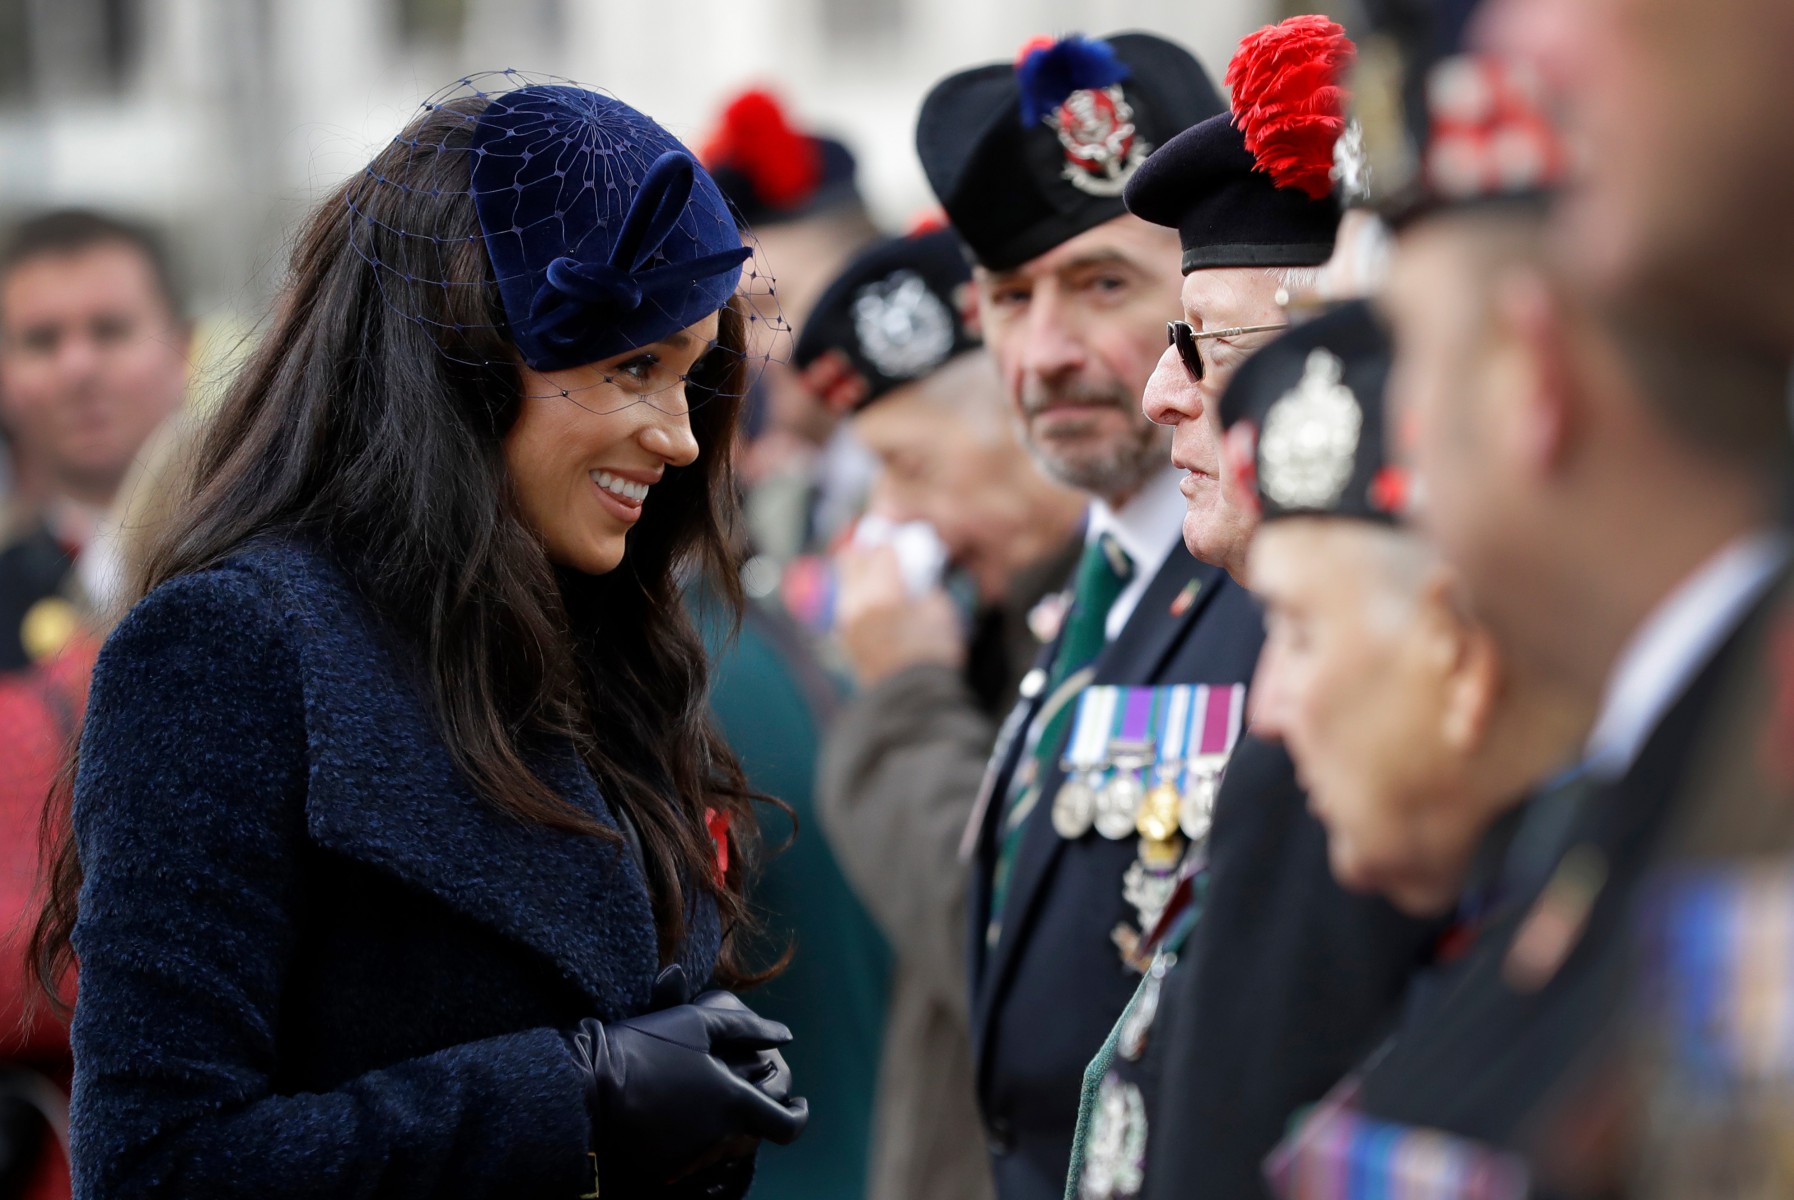 Meghan Markle smiles as she speaks to a veteran after the service